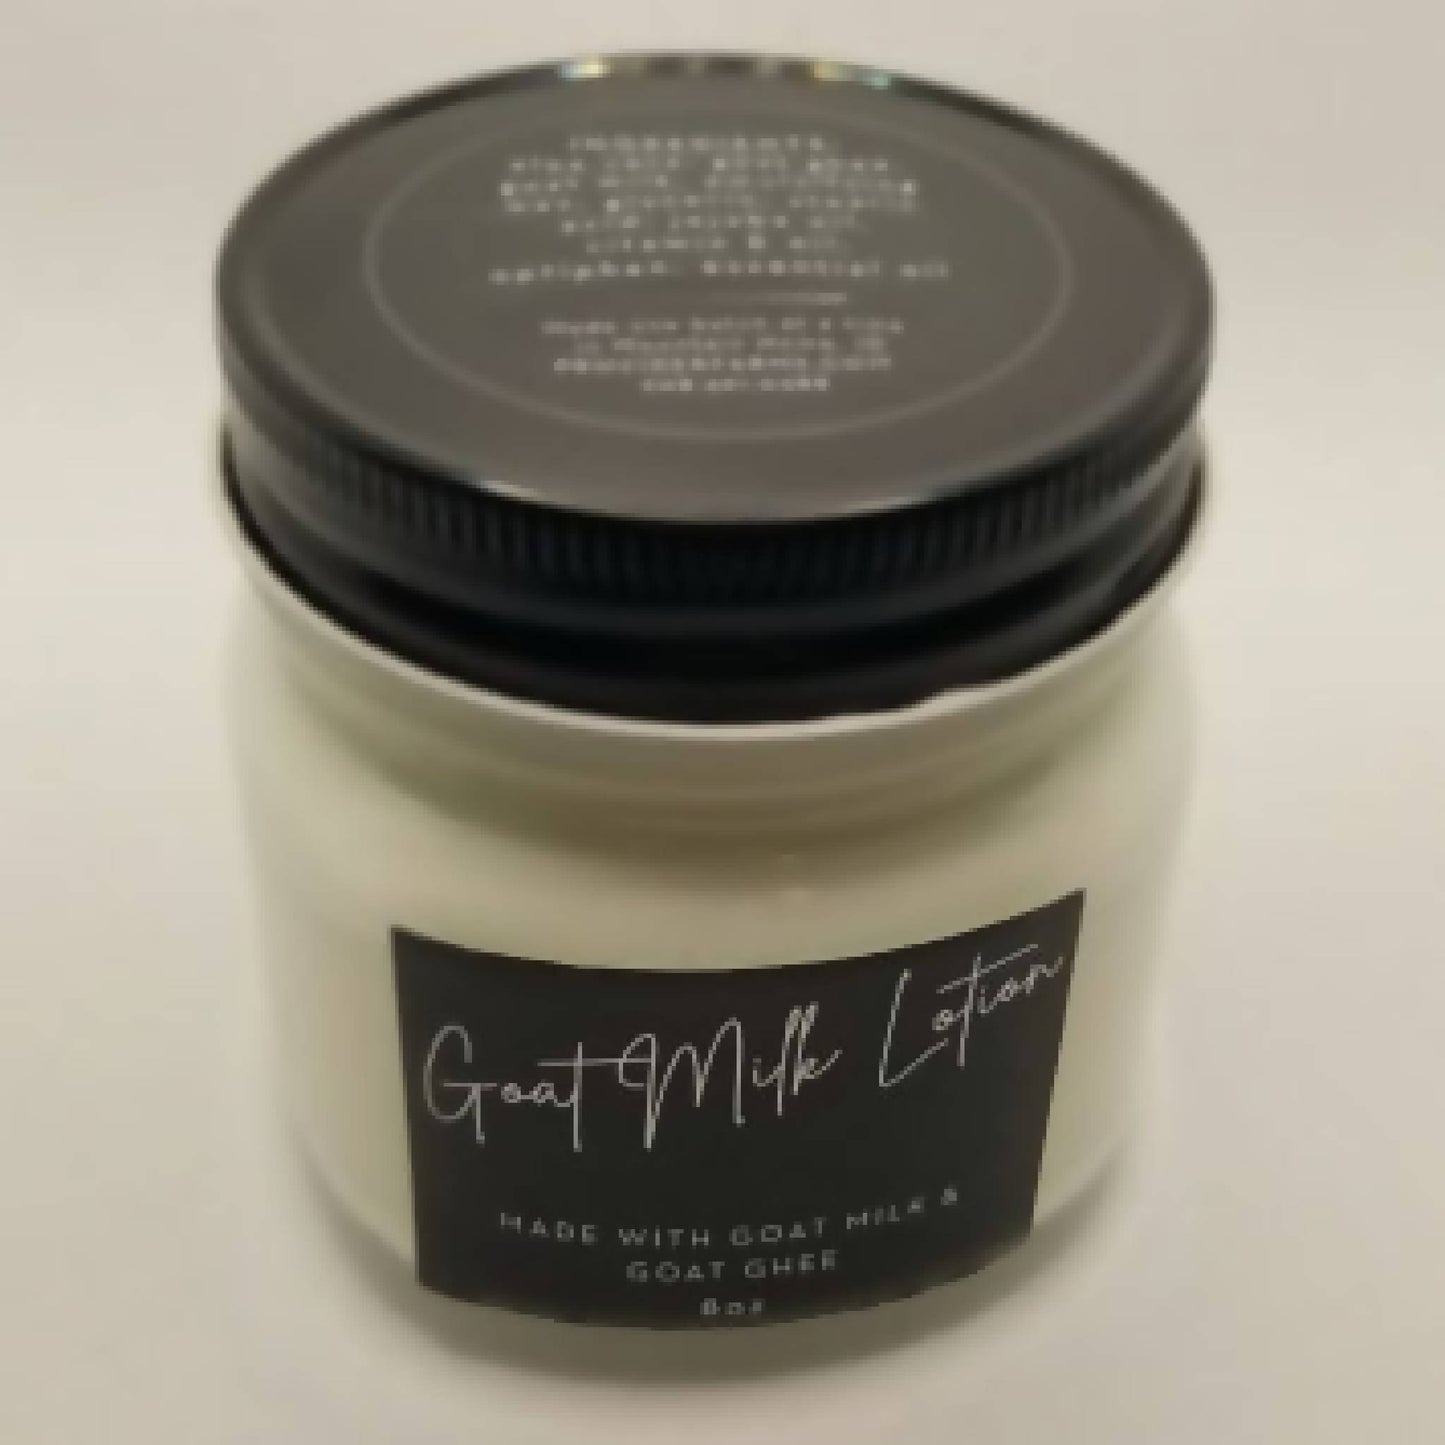 Goat Milk Lotion with Goat Ghee